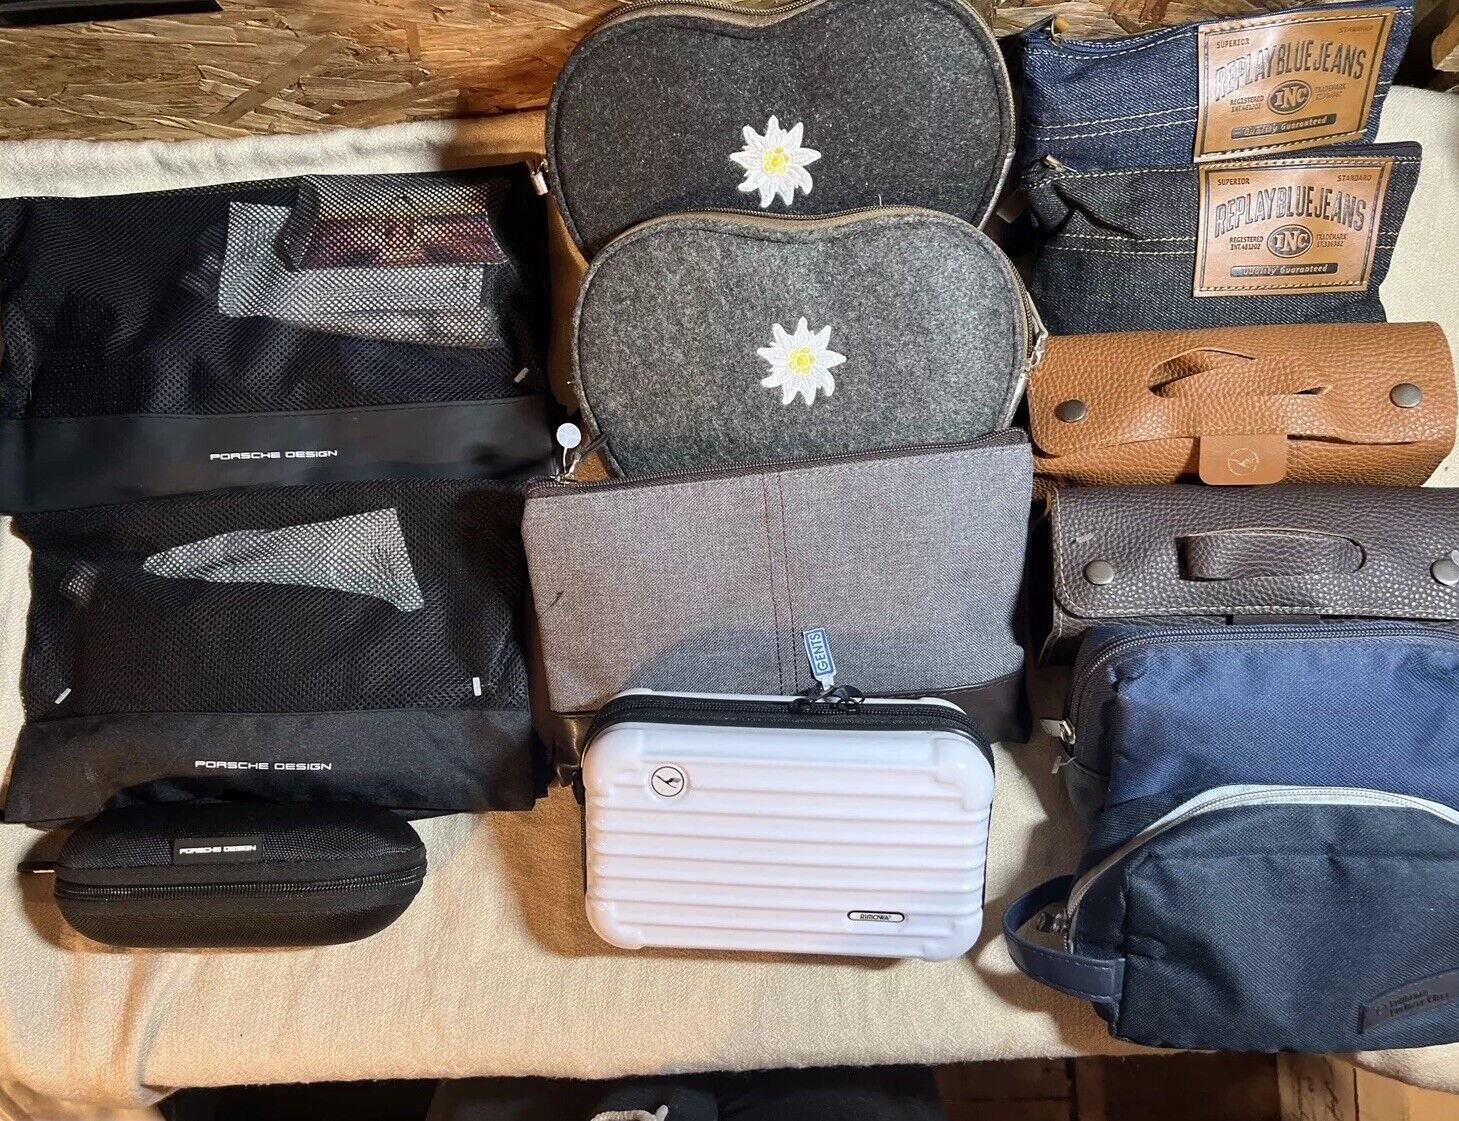 Lufthansa Airlines Big Collection Amenity Kit